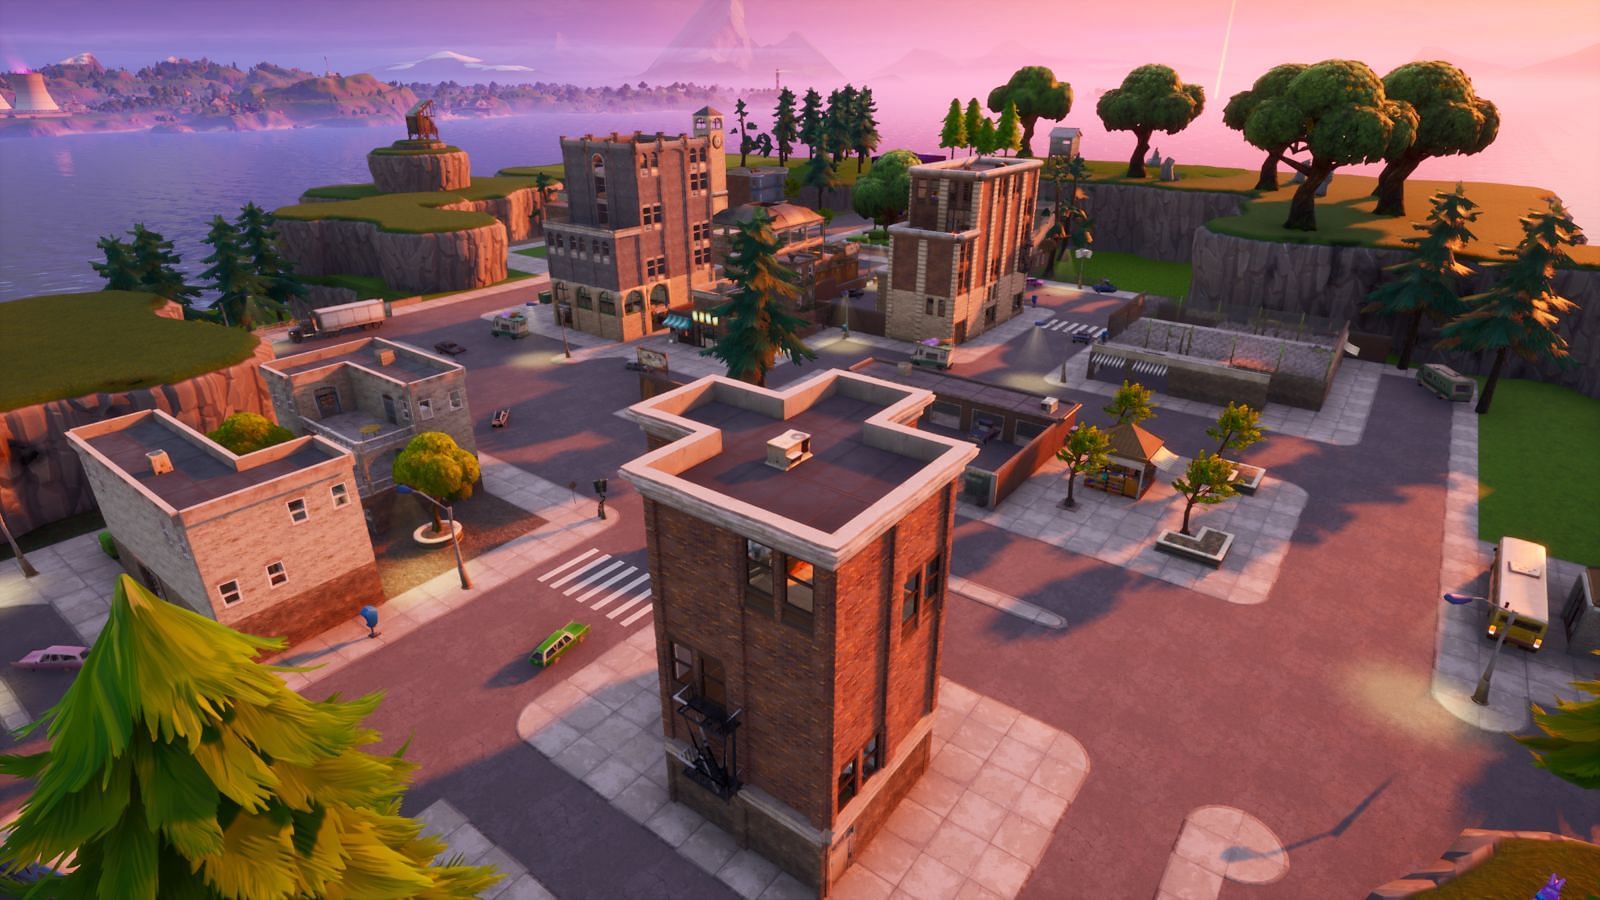 Tilted Towers is one of the most feared locations in Fortnite (Image via Epic Games)